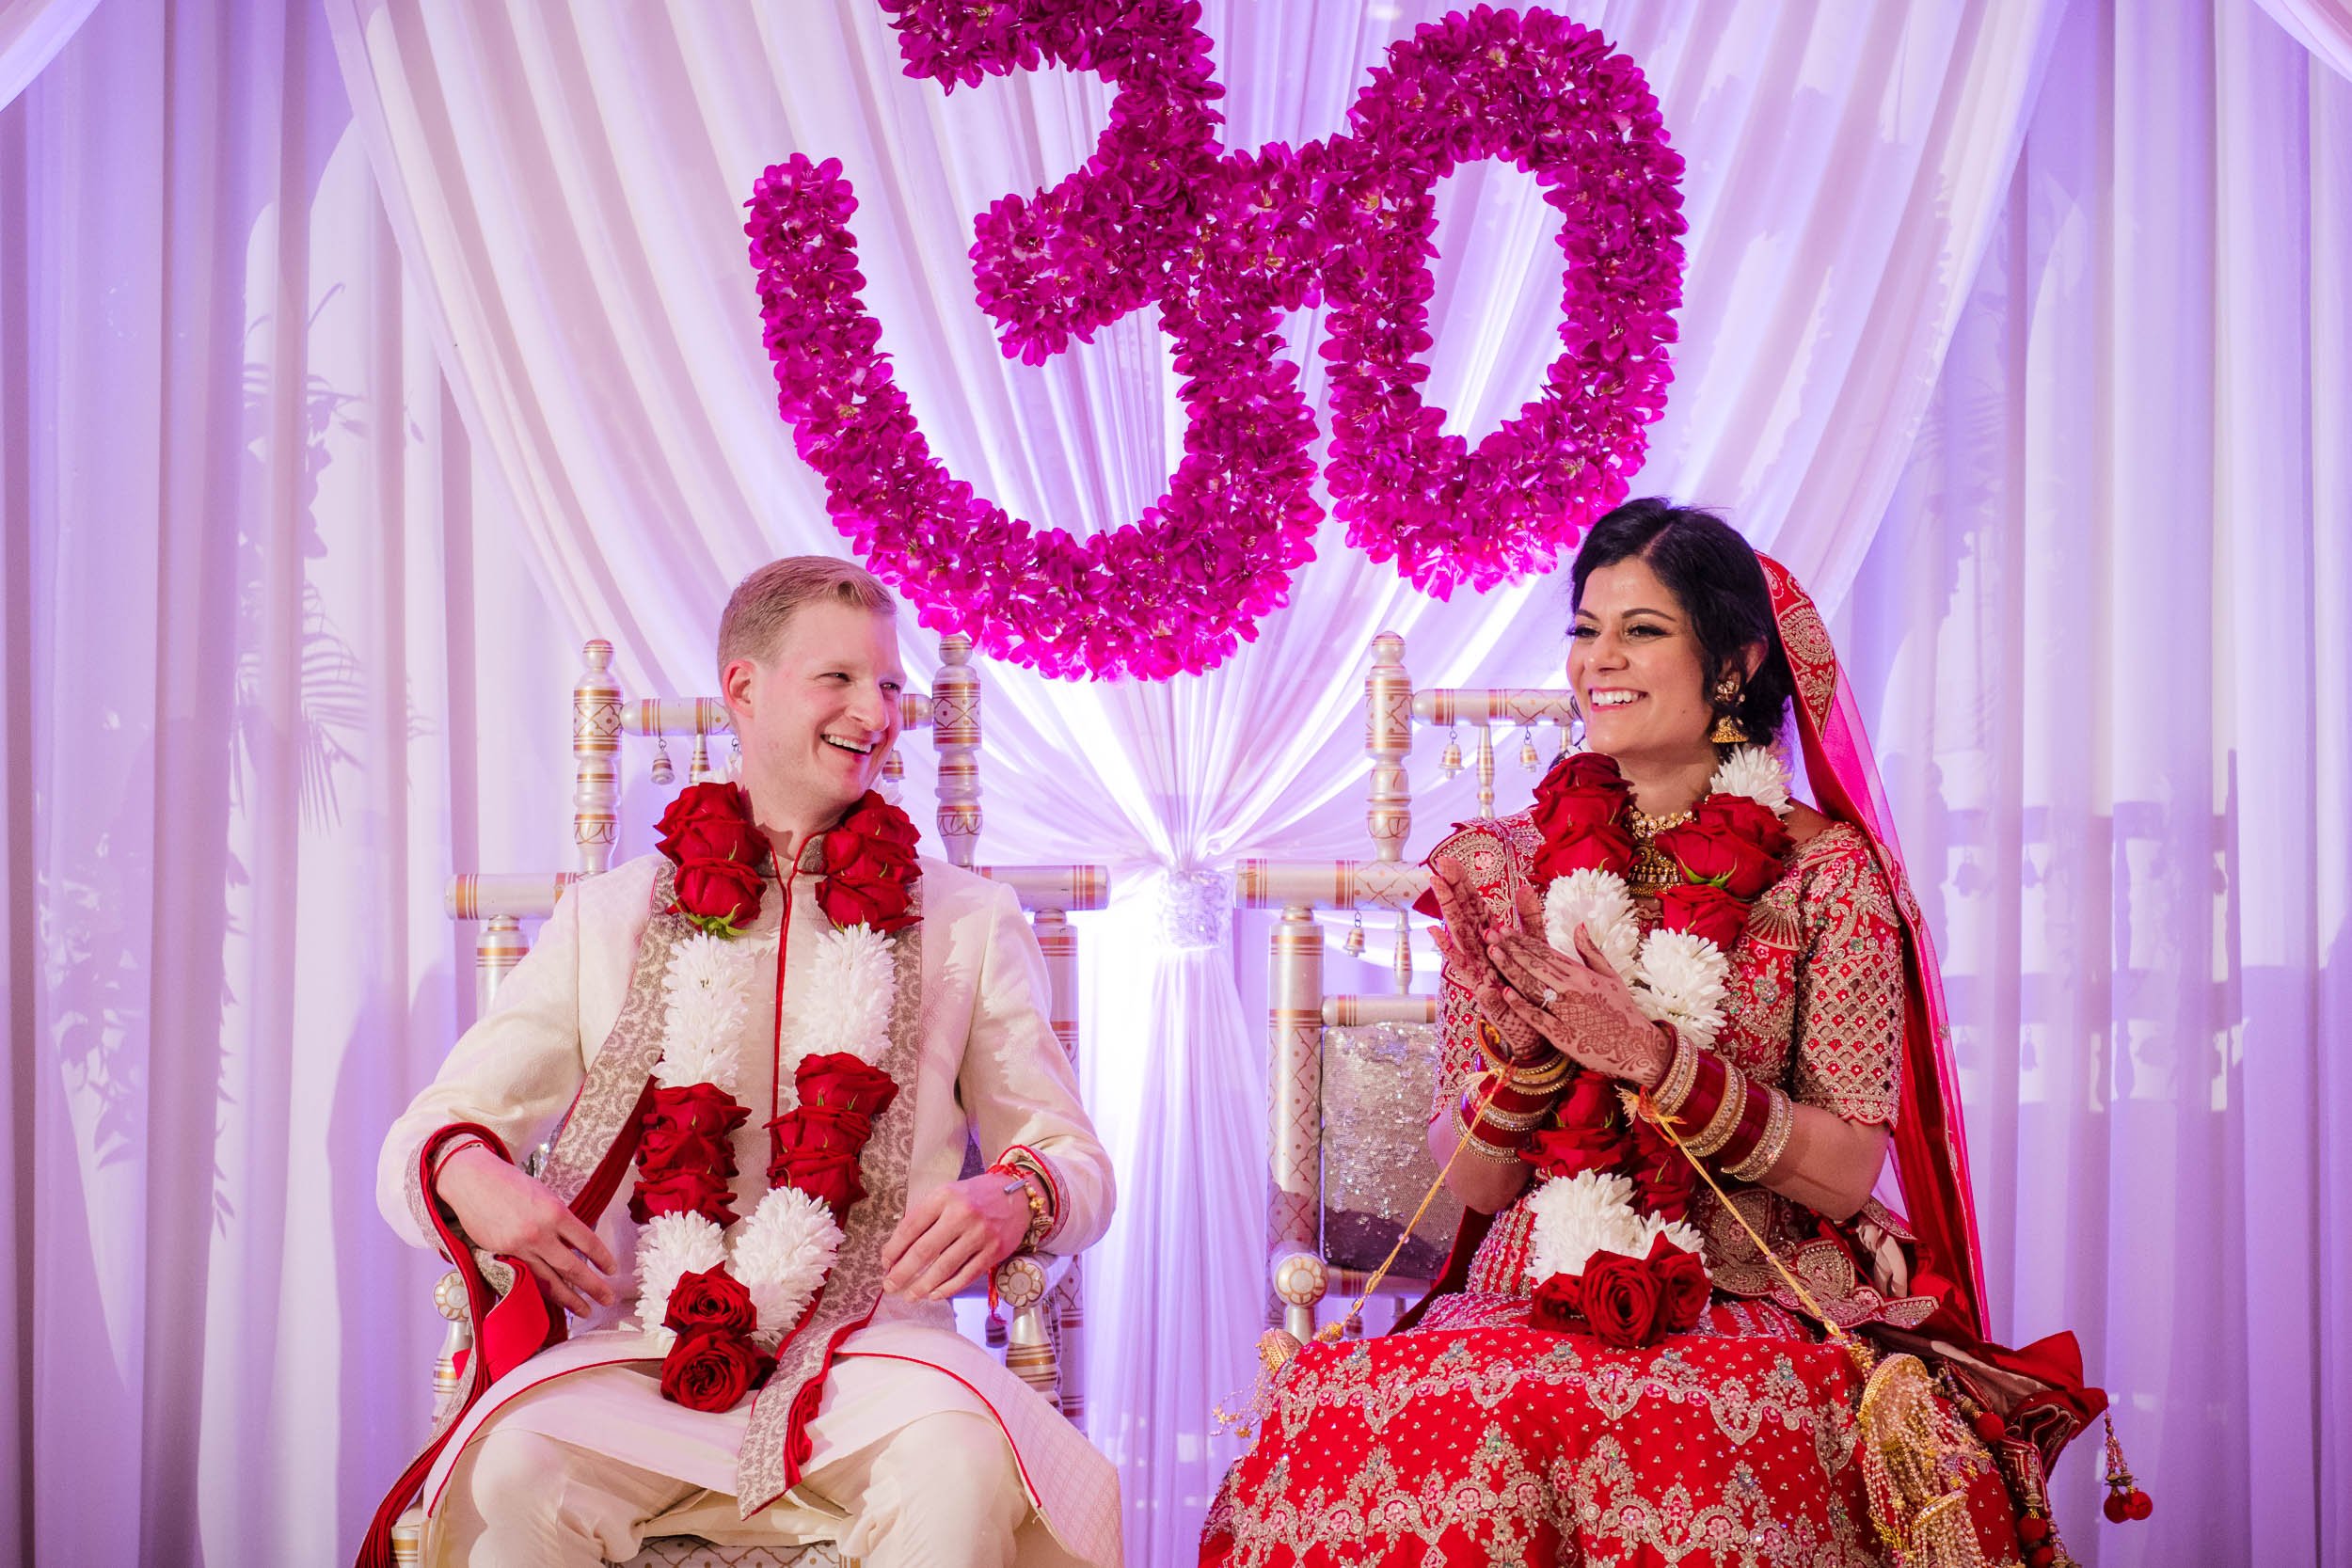 Indian Wedding Photographers | Renaissance Schaumburg | J. Brown Photography | bride and groom laugh during ceremony.